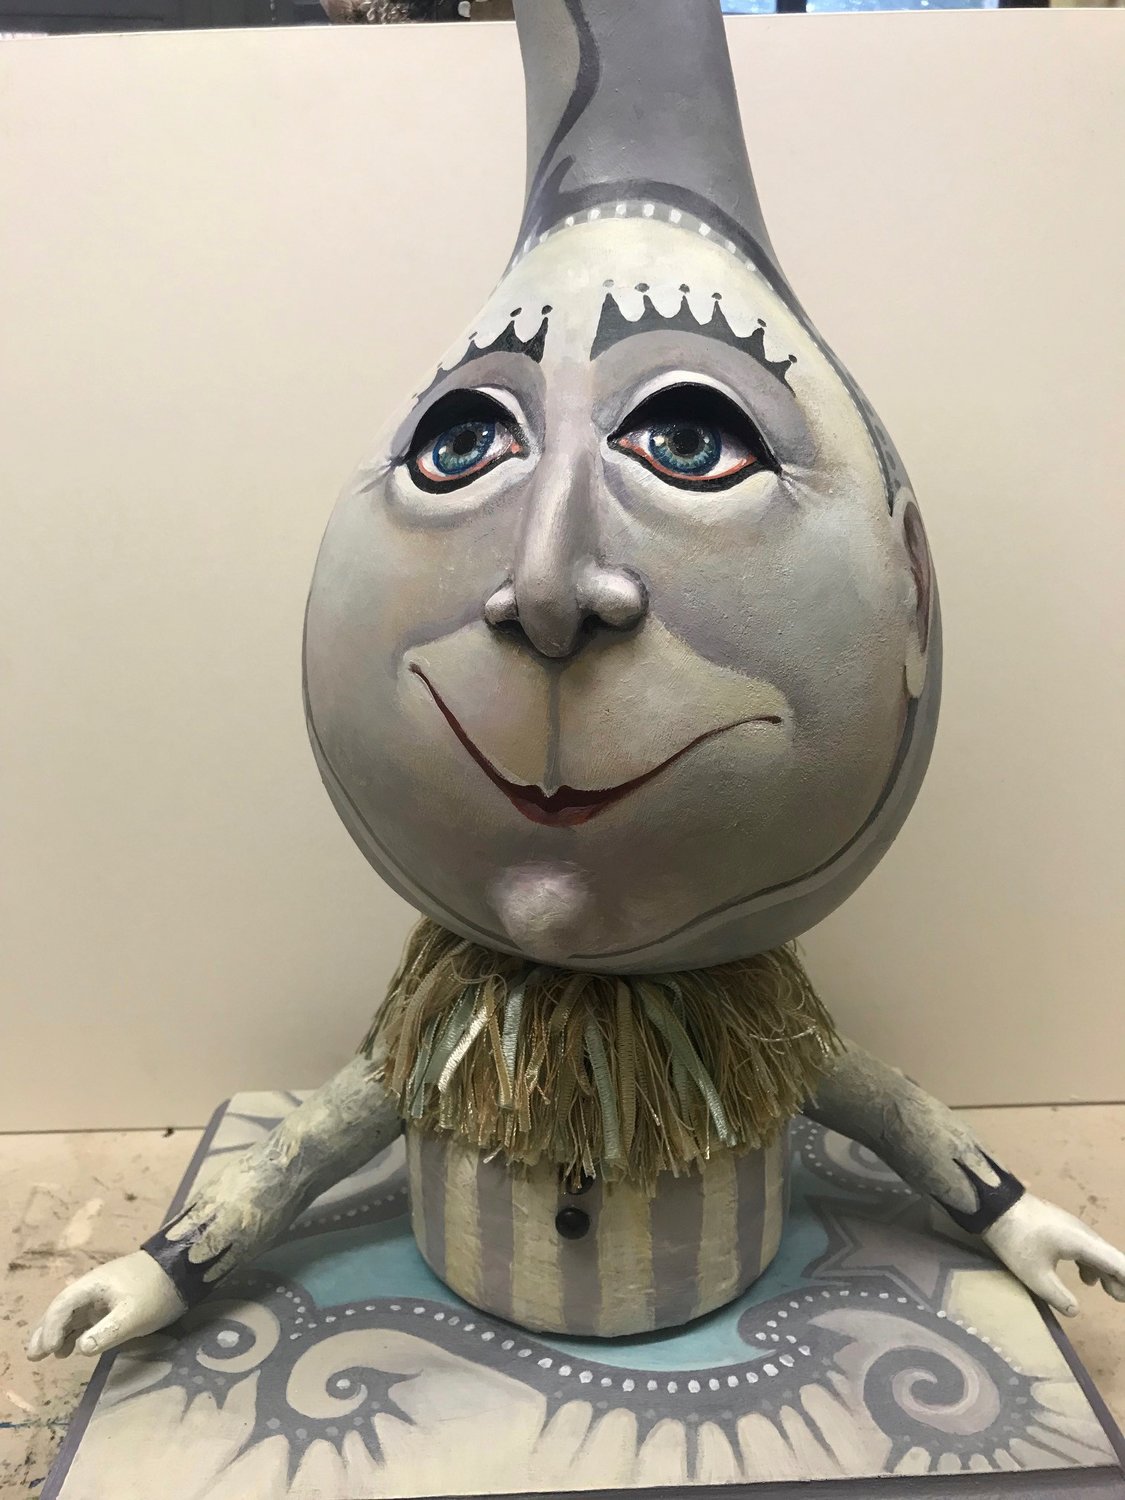 “Clarabell” by Jan Miller is one of the artist’s whimsical sculptures.